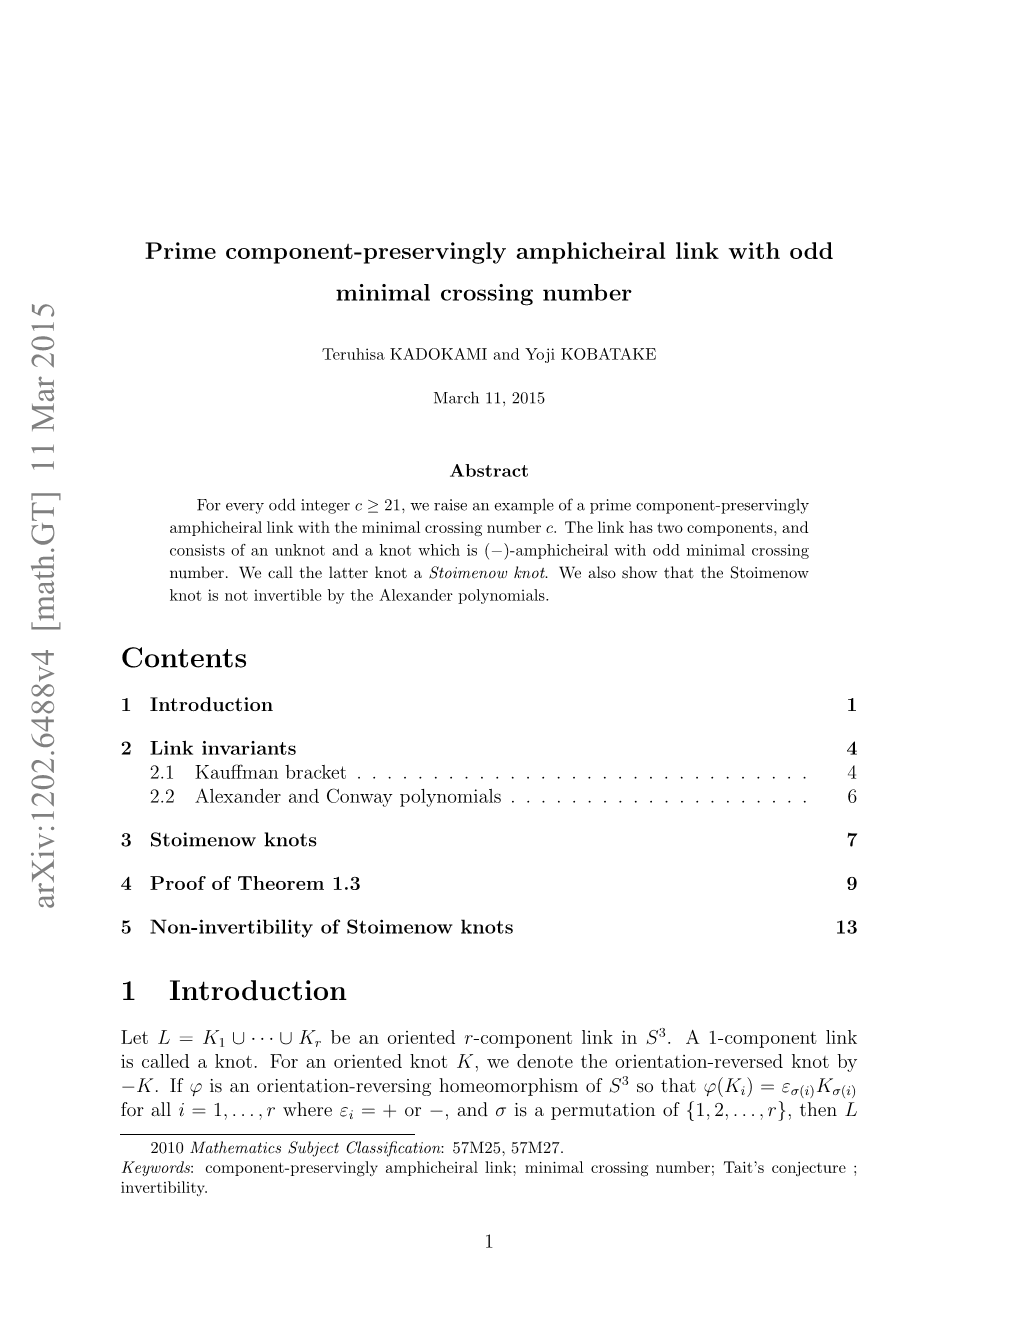 Arxiv:1202.6488V4 [Math.GT] 11 Mar 2015 Ikinvariants Link 2 Introduction 1 Contents Invertibility